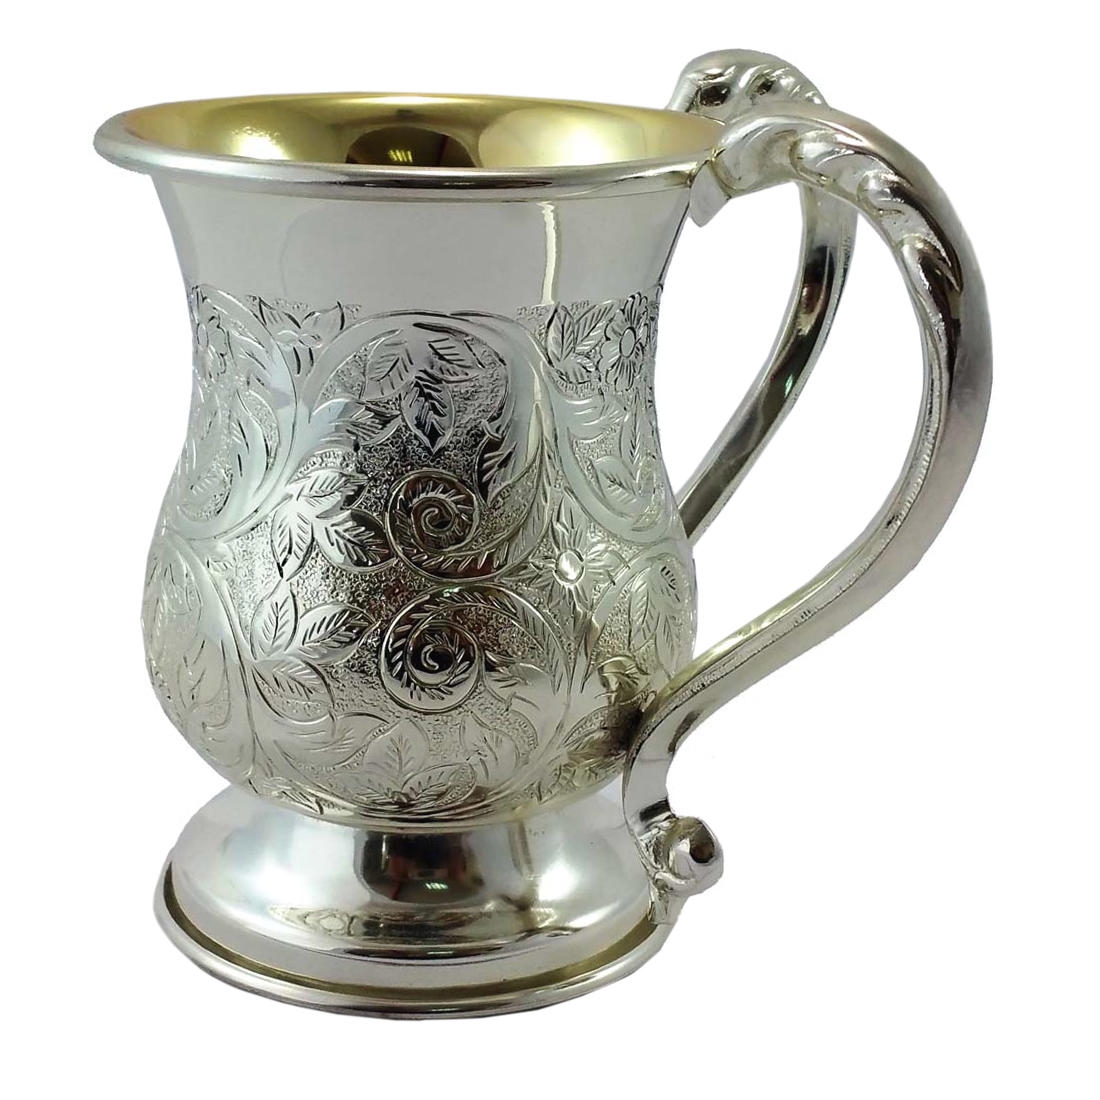 Fine Silver Plated Aluminum Washing Cup - Baroque - 1